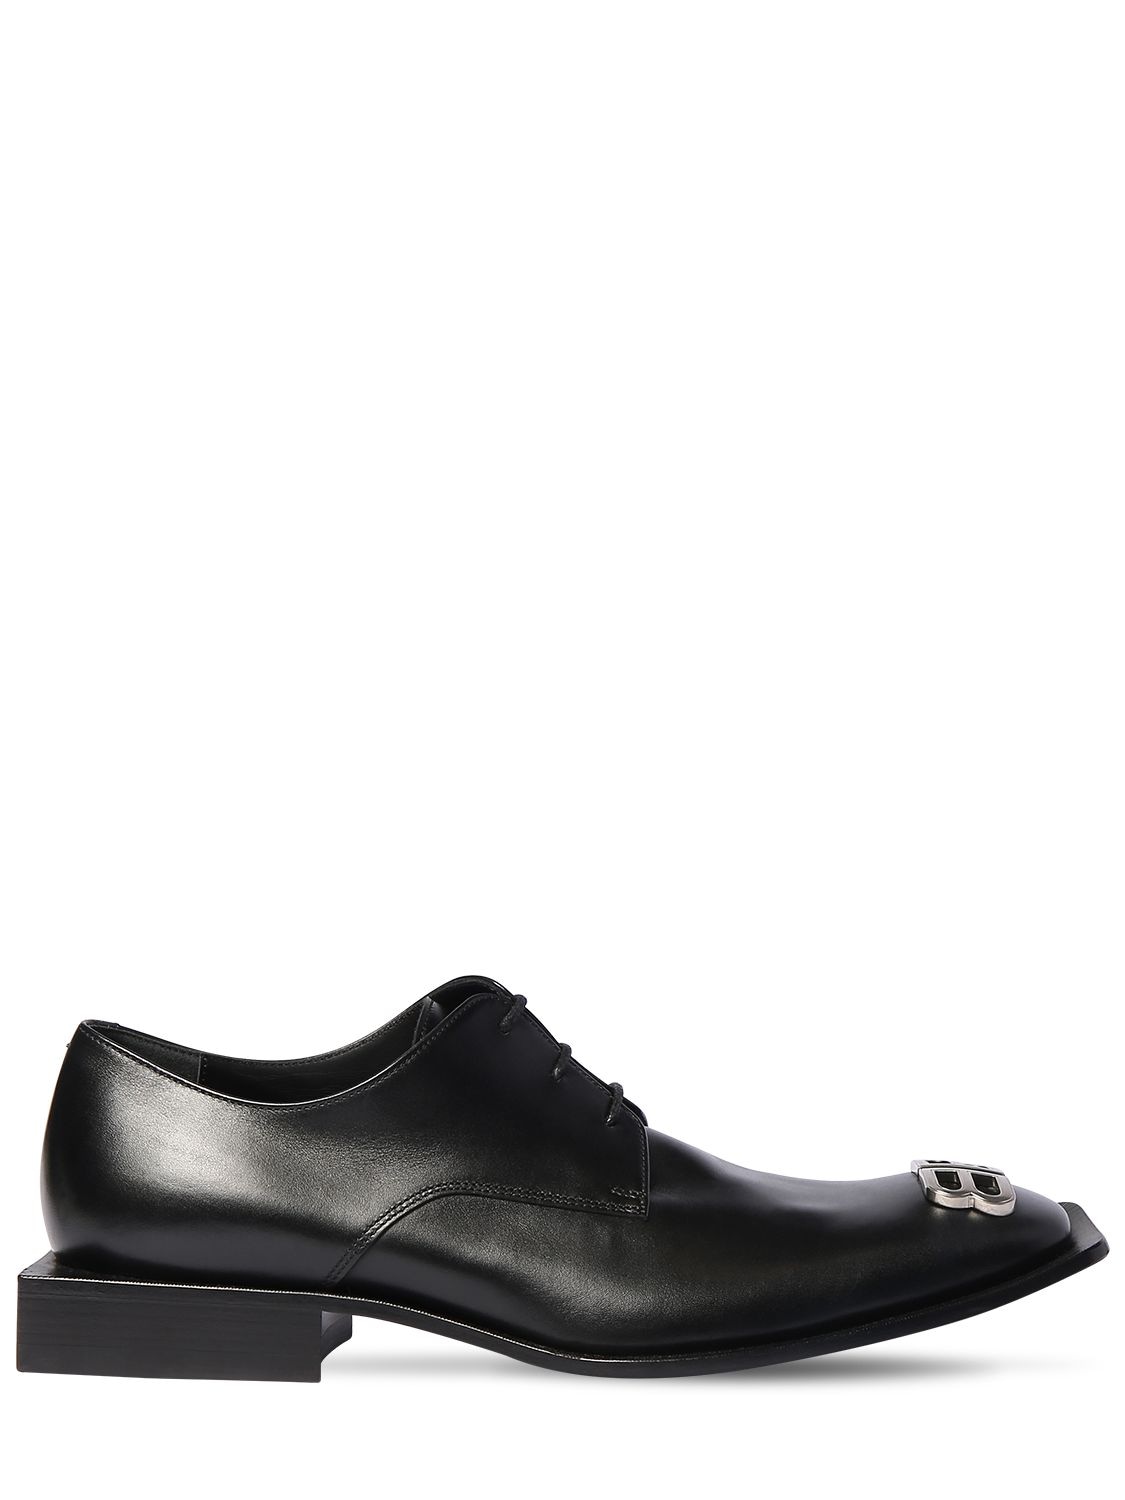 Balenciaga - 35mm leather lace-up shoes 